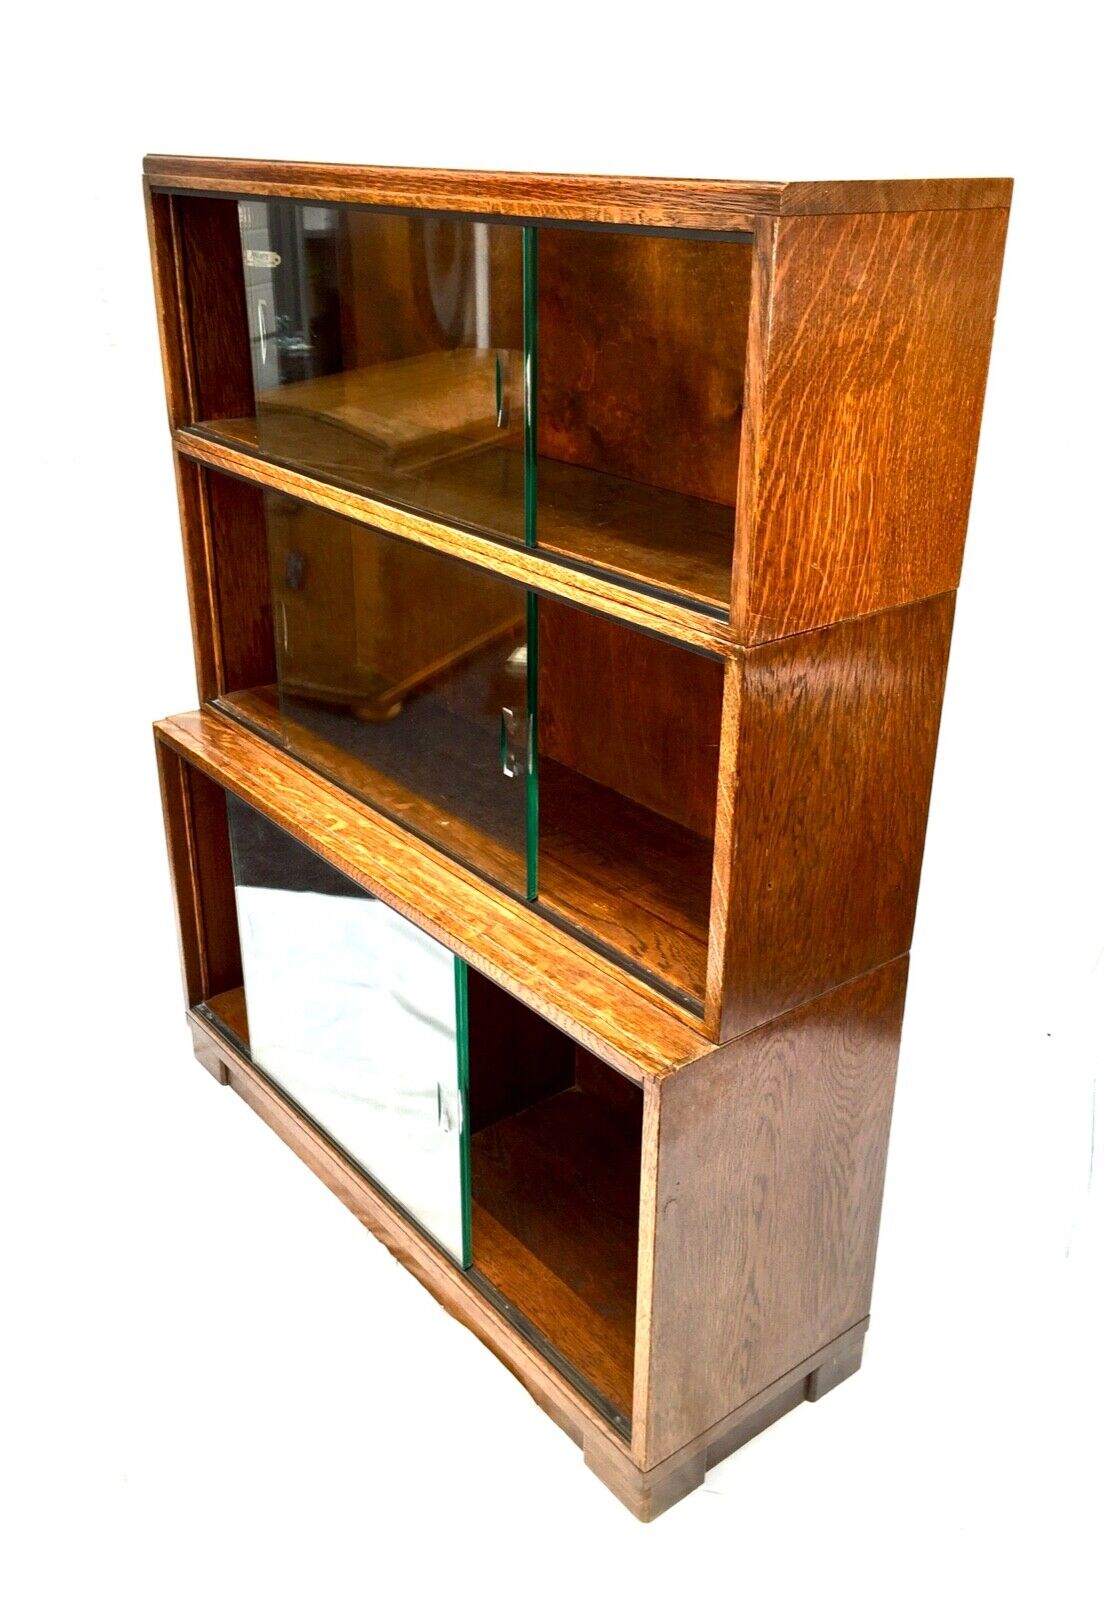 Glazed Oak Sectional Barristers Bookcase by Minty / Display Cabinet / Antique.